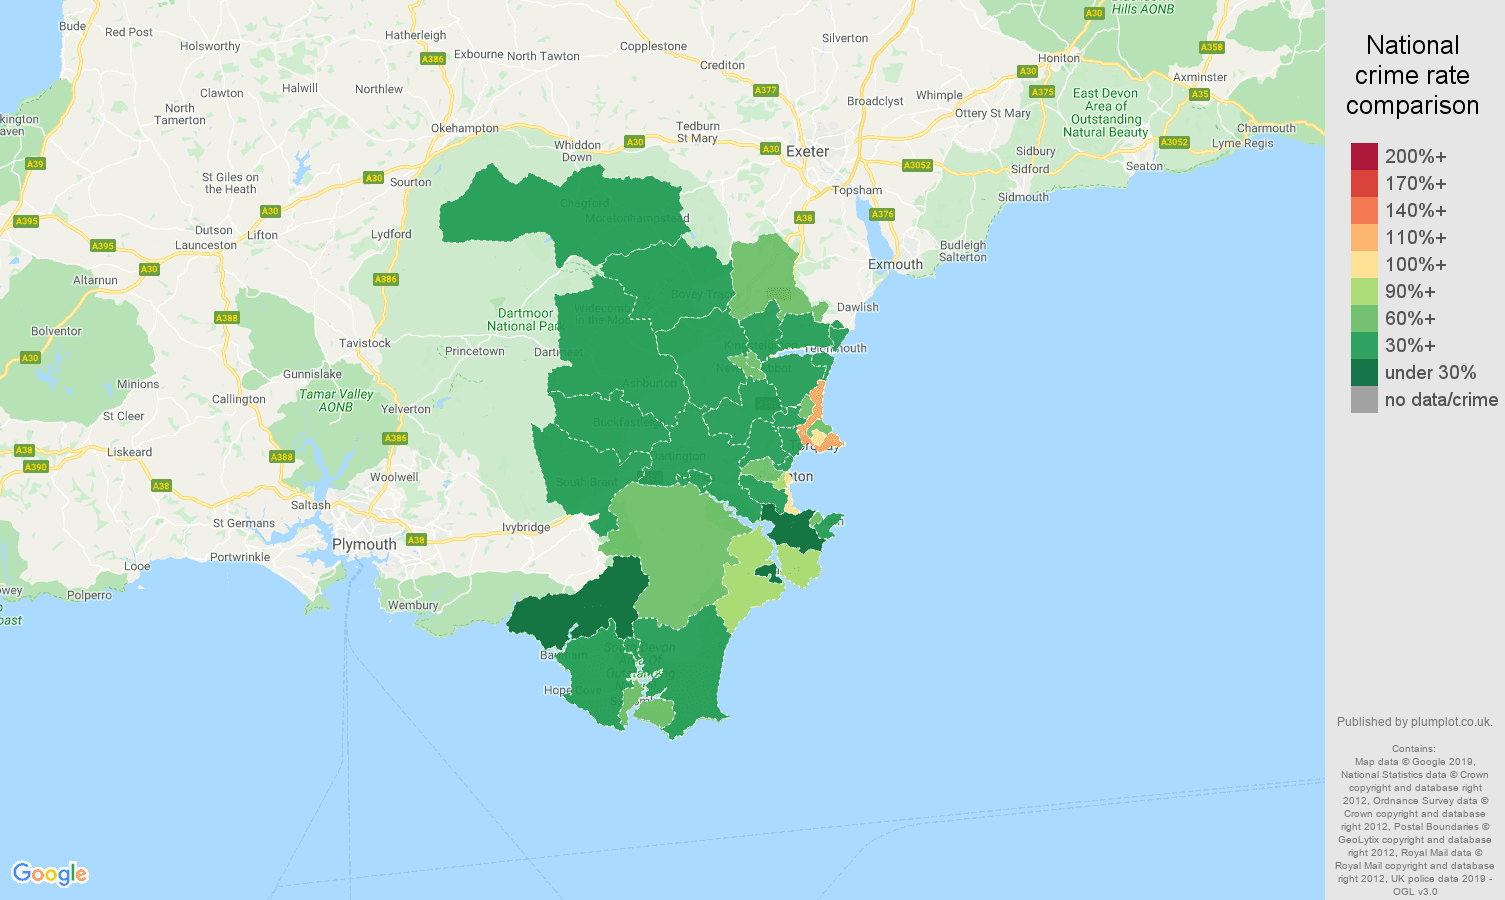 Torquay other theft crime rate comparison map